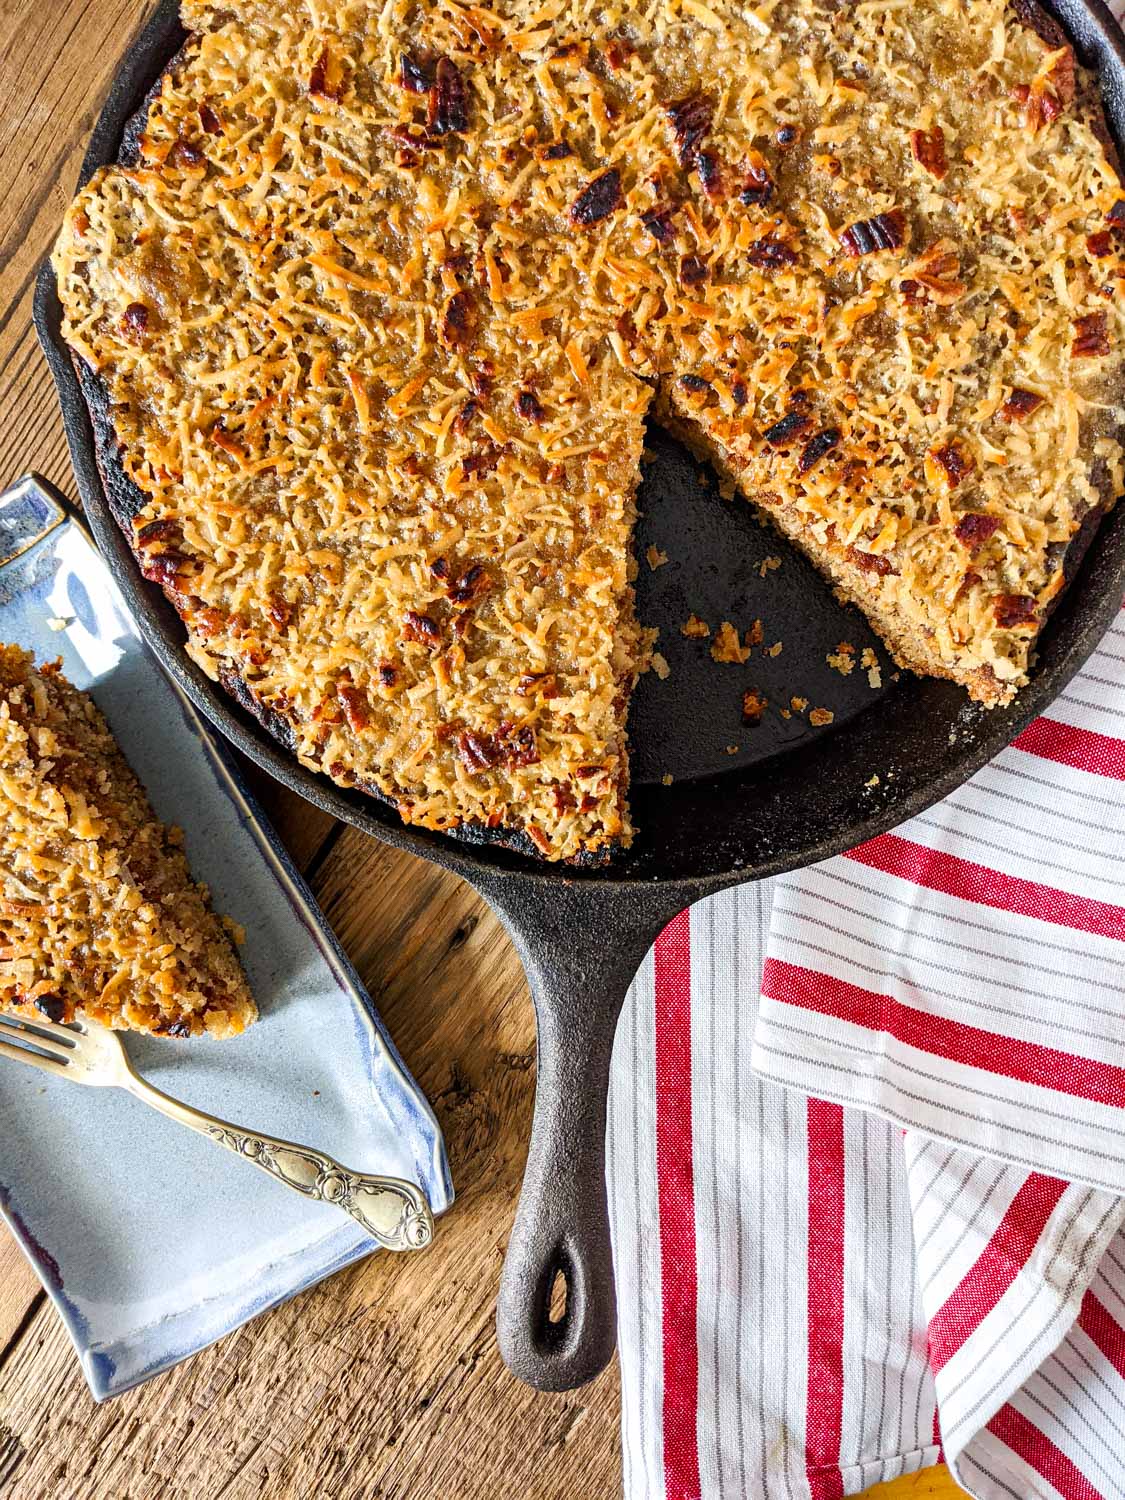 Buttermilk Banana Skillet Cake with Broiled Rum Topping